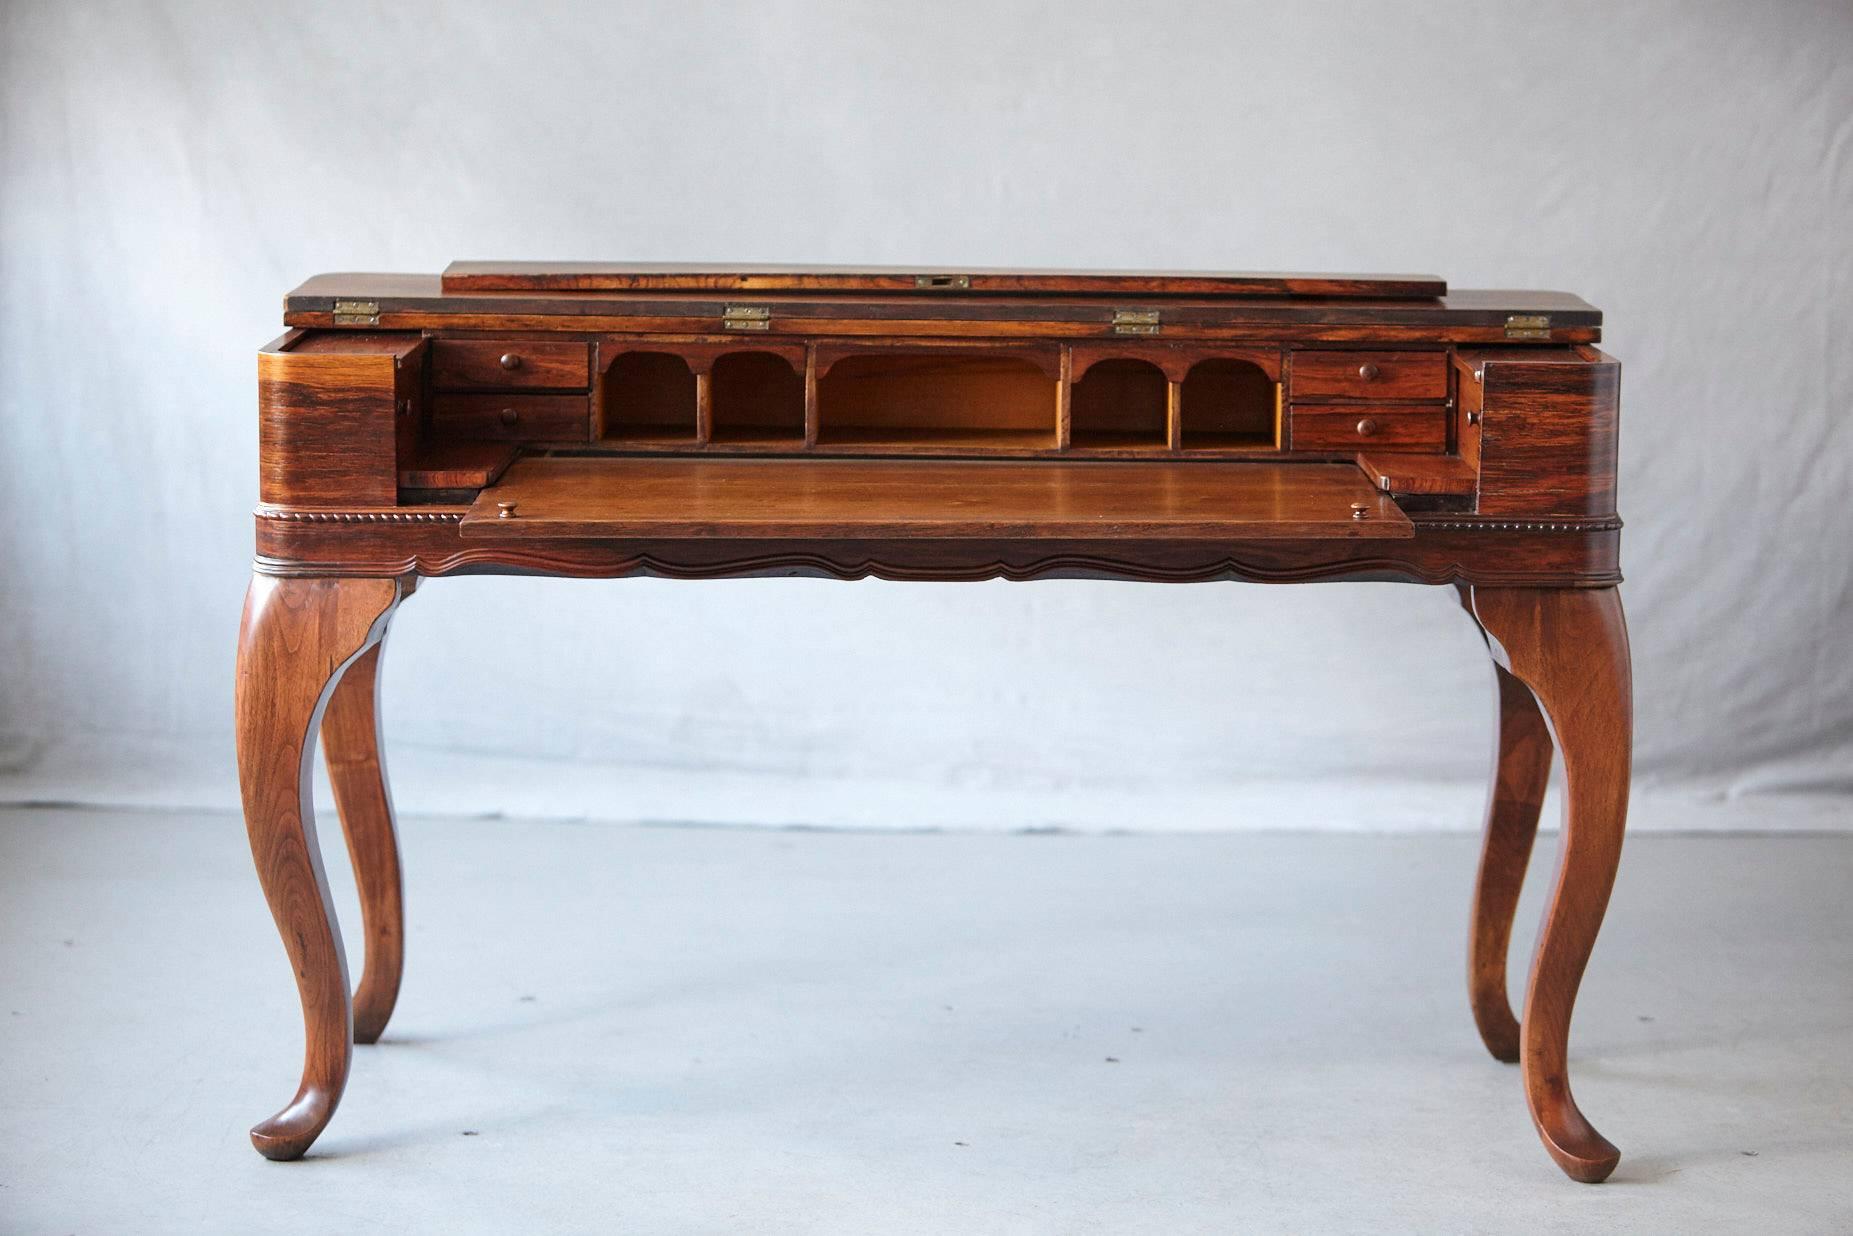 Exceptional late 19th century Queen Anne style Rosewood spinet desk with a myriad of drawers, pigeon holes, and cupboards mounted on cabriole legs with pad feed. 
The desk has been completely refinished, photographed and stored.
Measurements: W 53.5